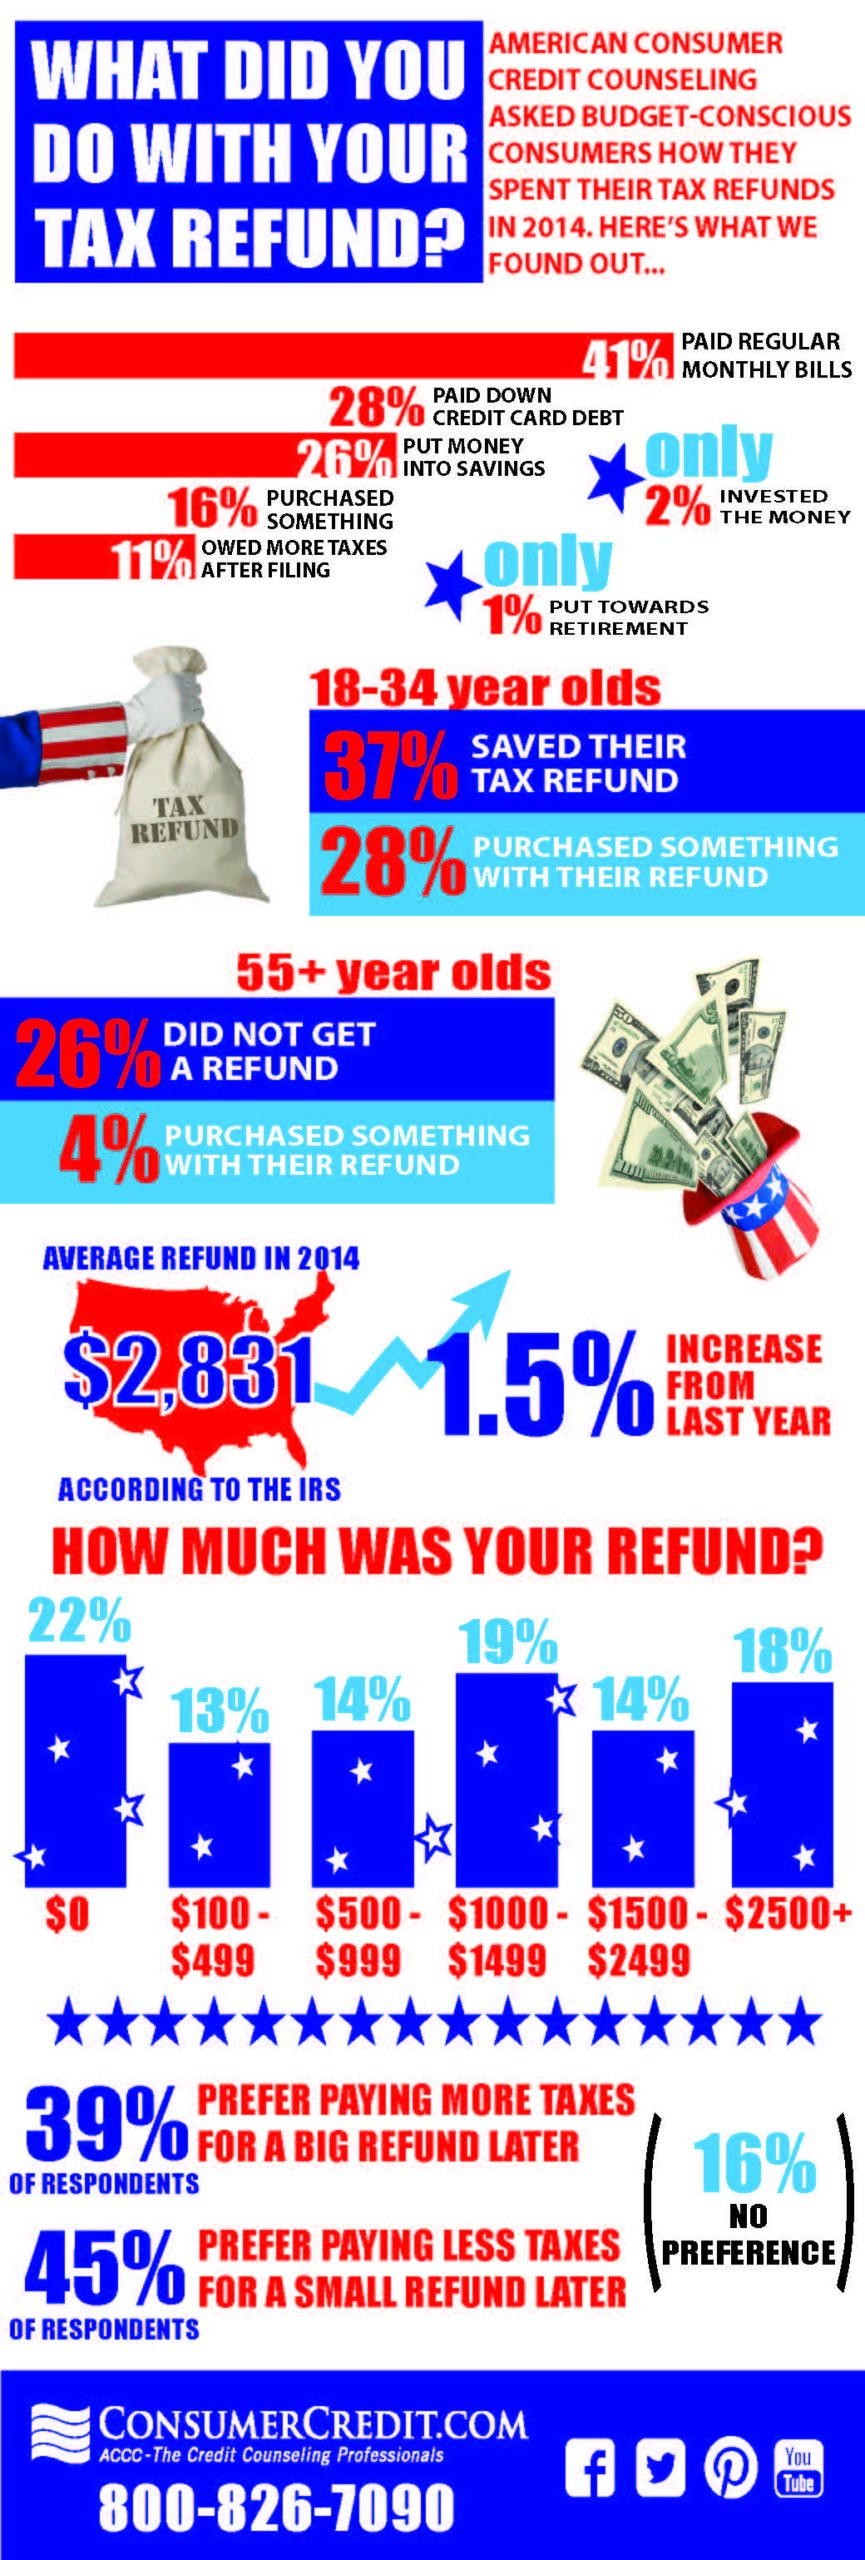 What Did You Do With Your Tax Refund?